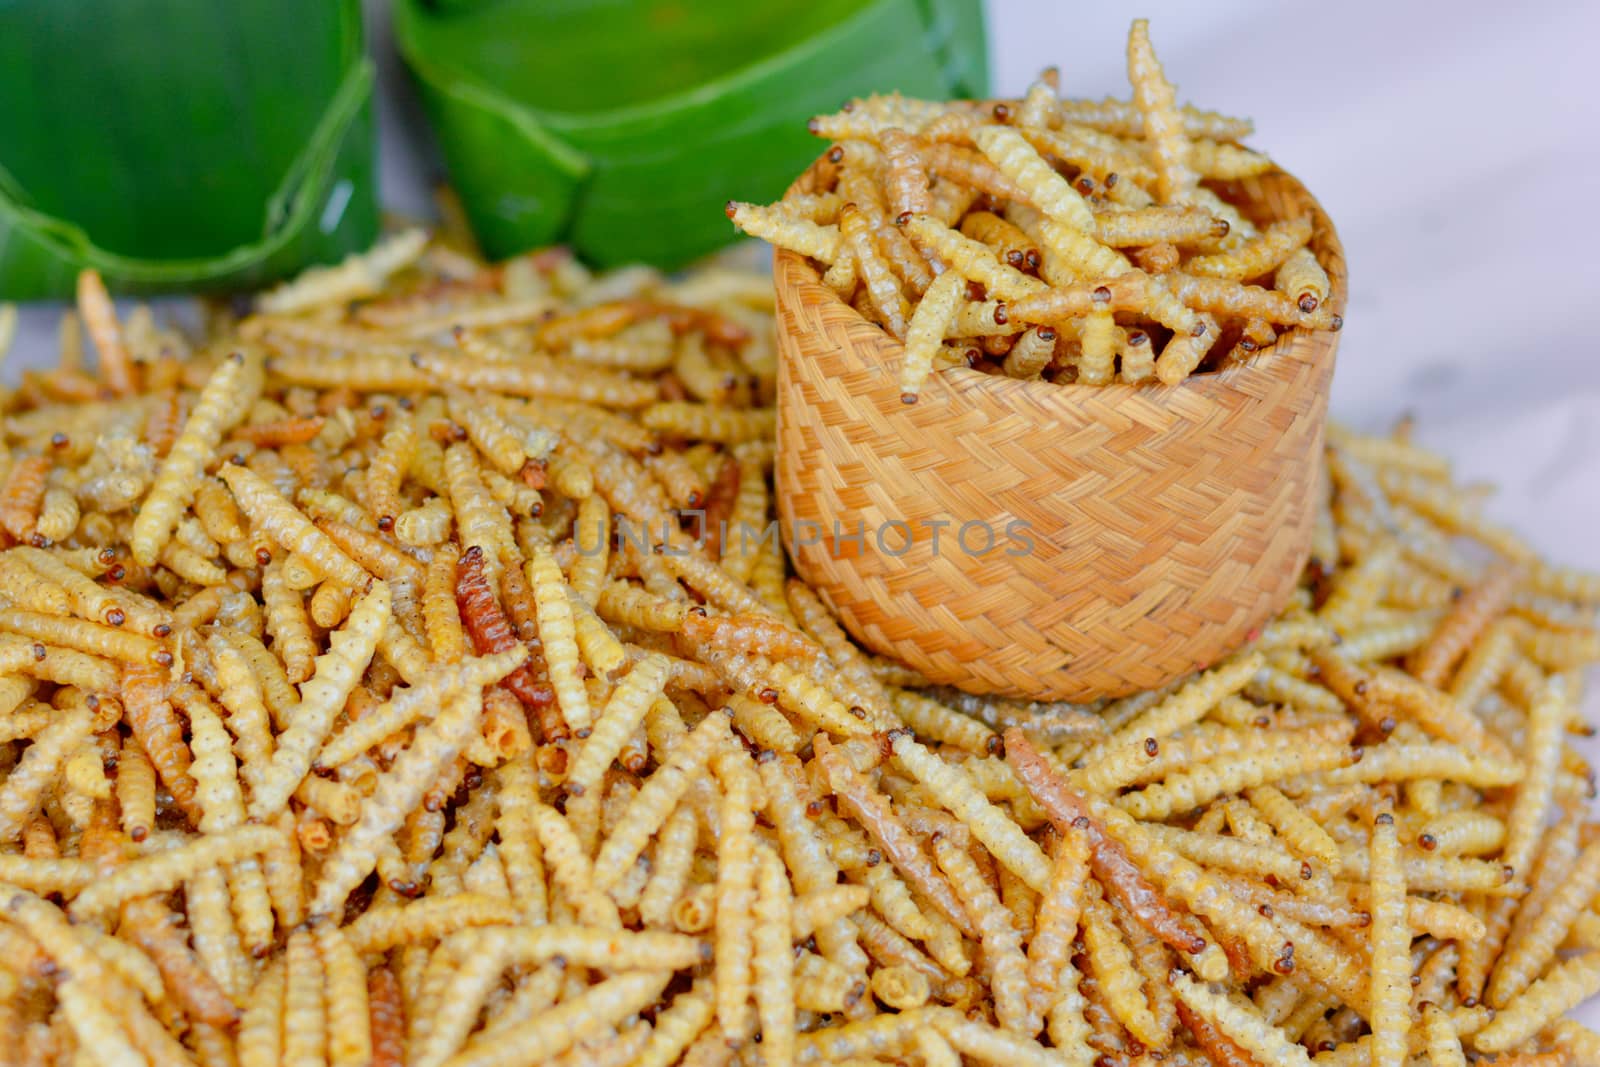 Thai street food. Deep fried insects (bamboo worm) in wooden basket sell in local market of Thailand. High protiene.